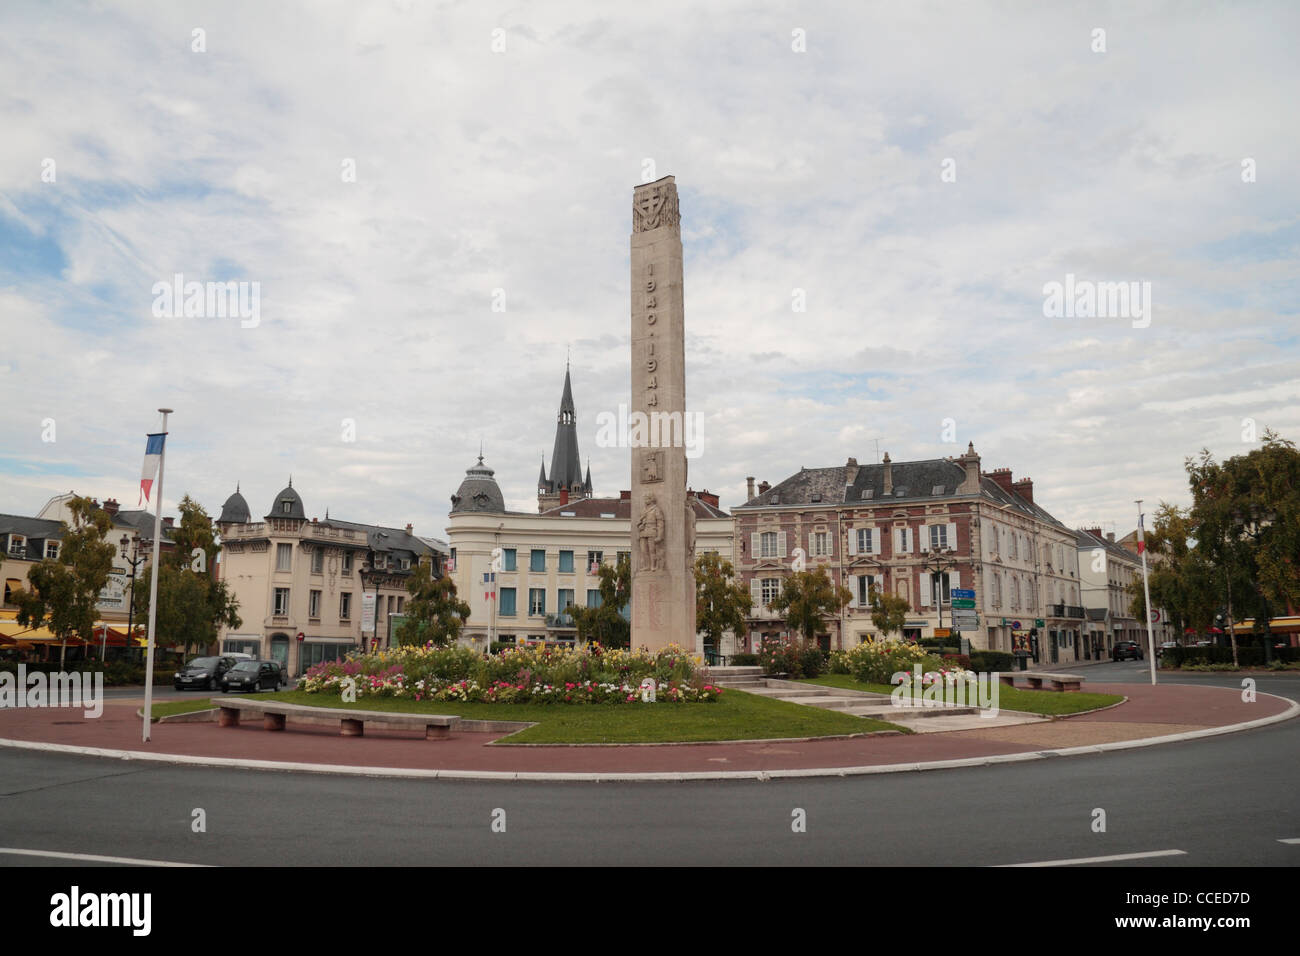 Memorial to the inhabitants of Épernay, Marne, France who died in the First and Second World War. Stock Photo